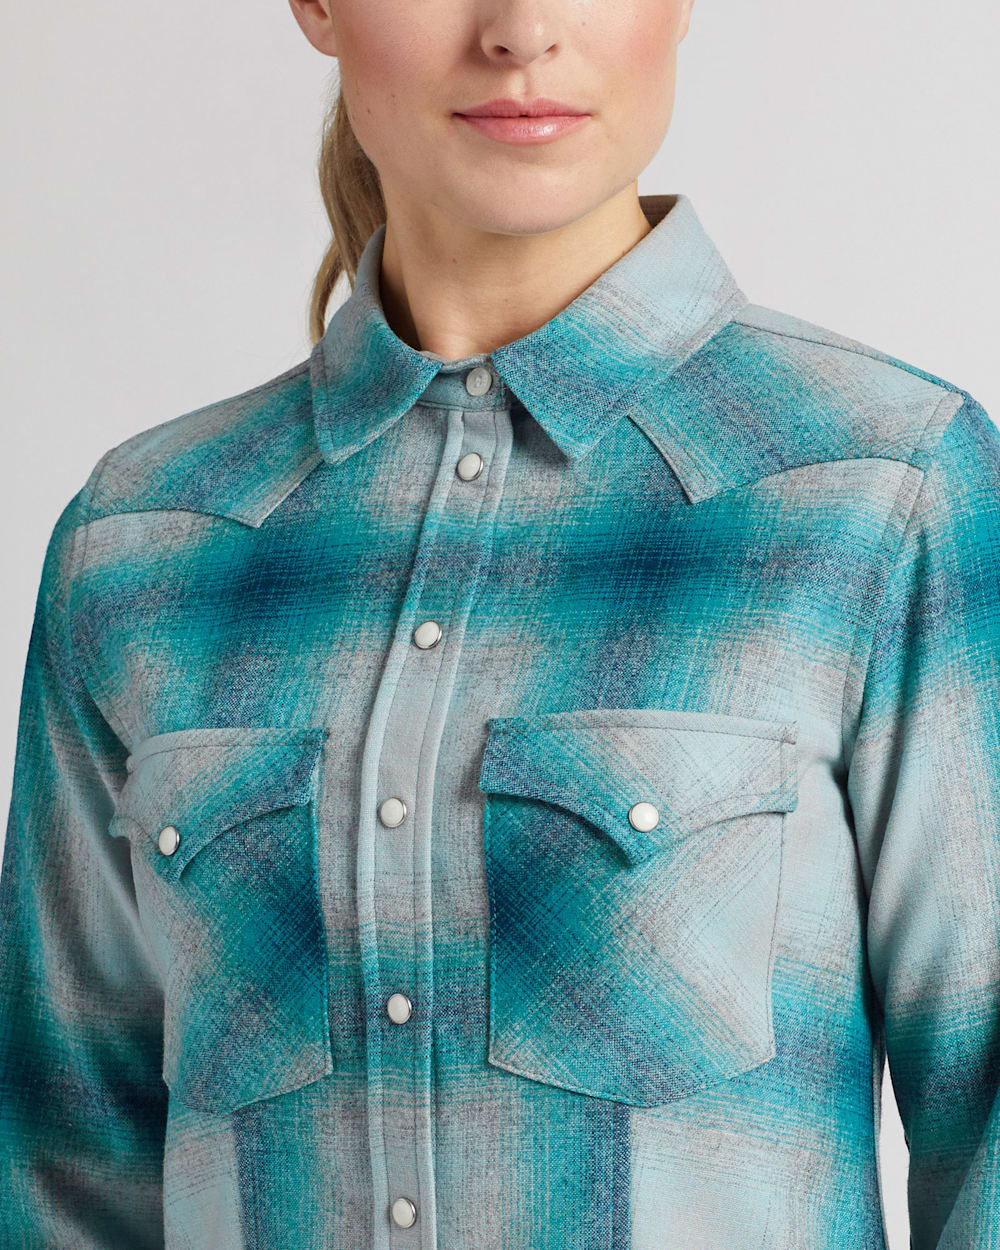 ALTERNATE VIEW OF WOMEN'S SNAP-FRONT CANYON SHIRT IN TURQUOISE/GREY OMBRE image number 4